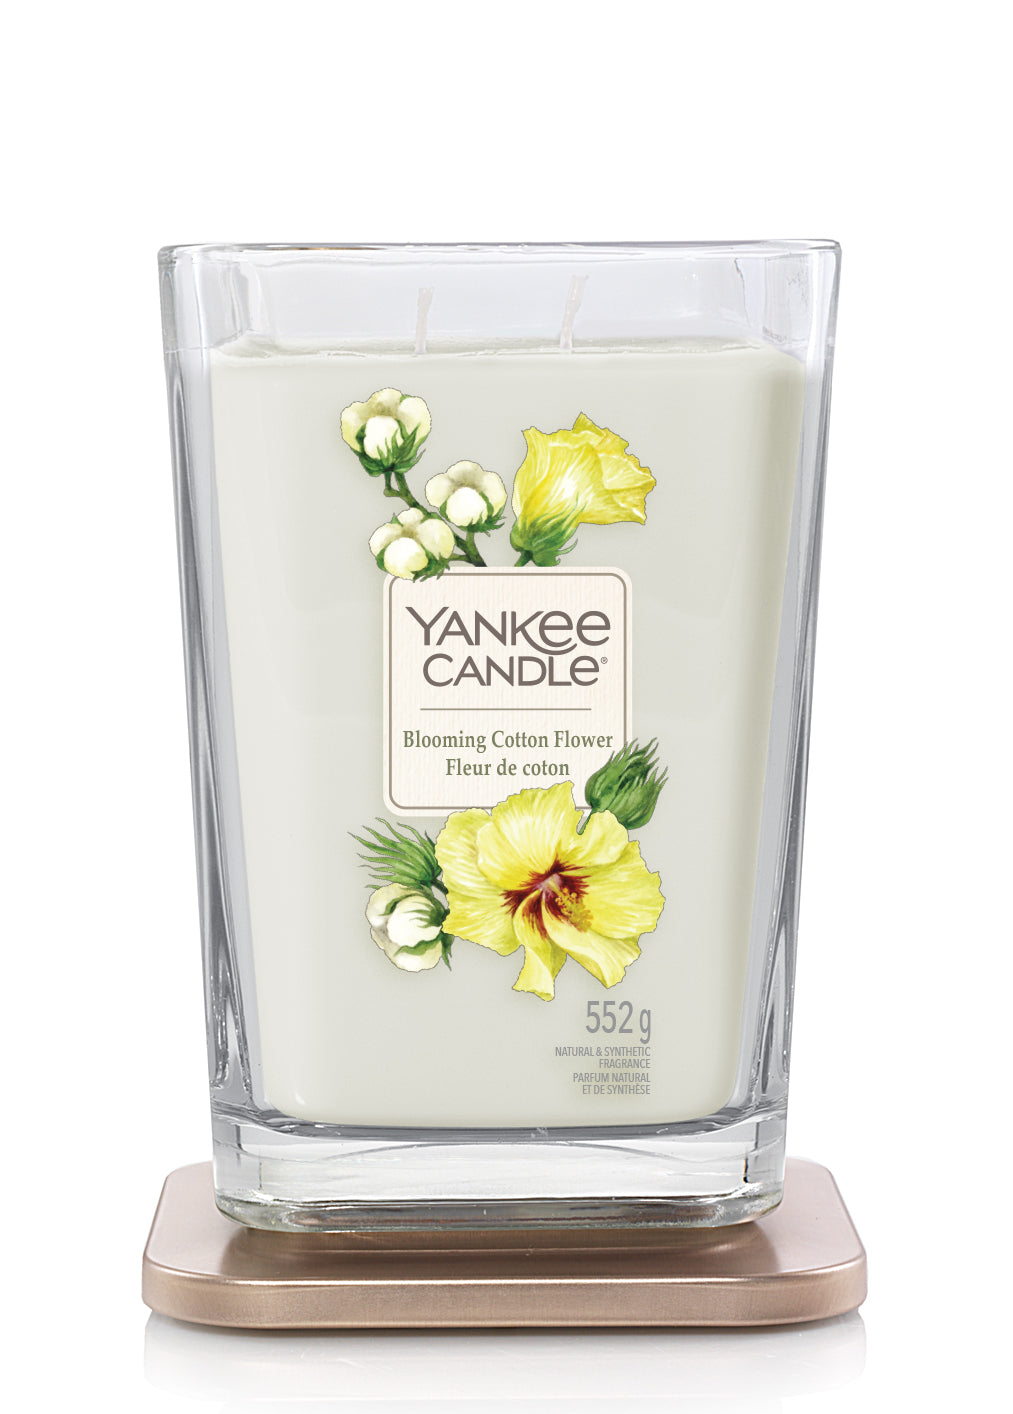 BLOOMING COTTON FLOWER -Yankee Candle- Candela Grande